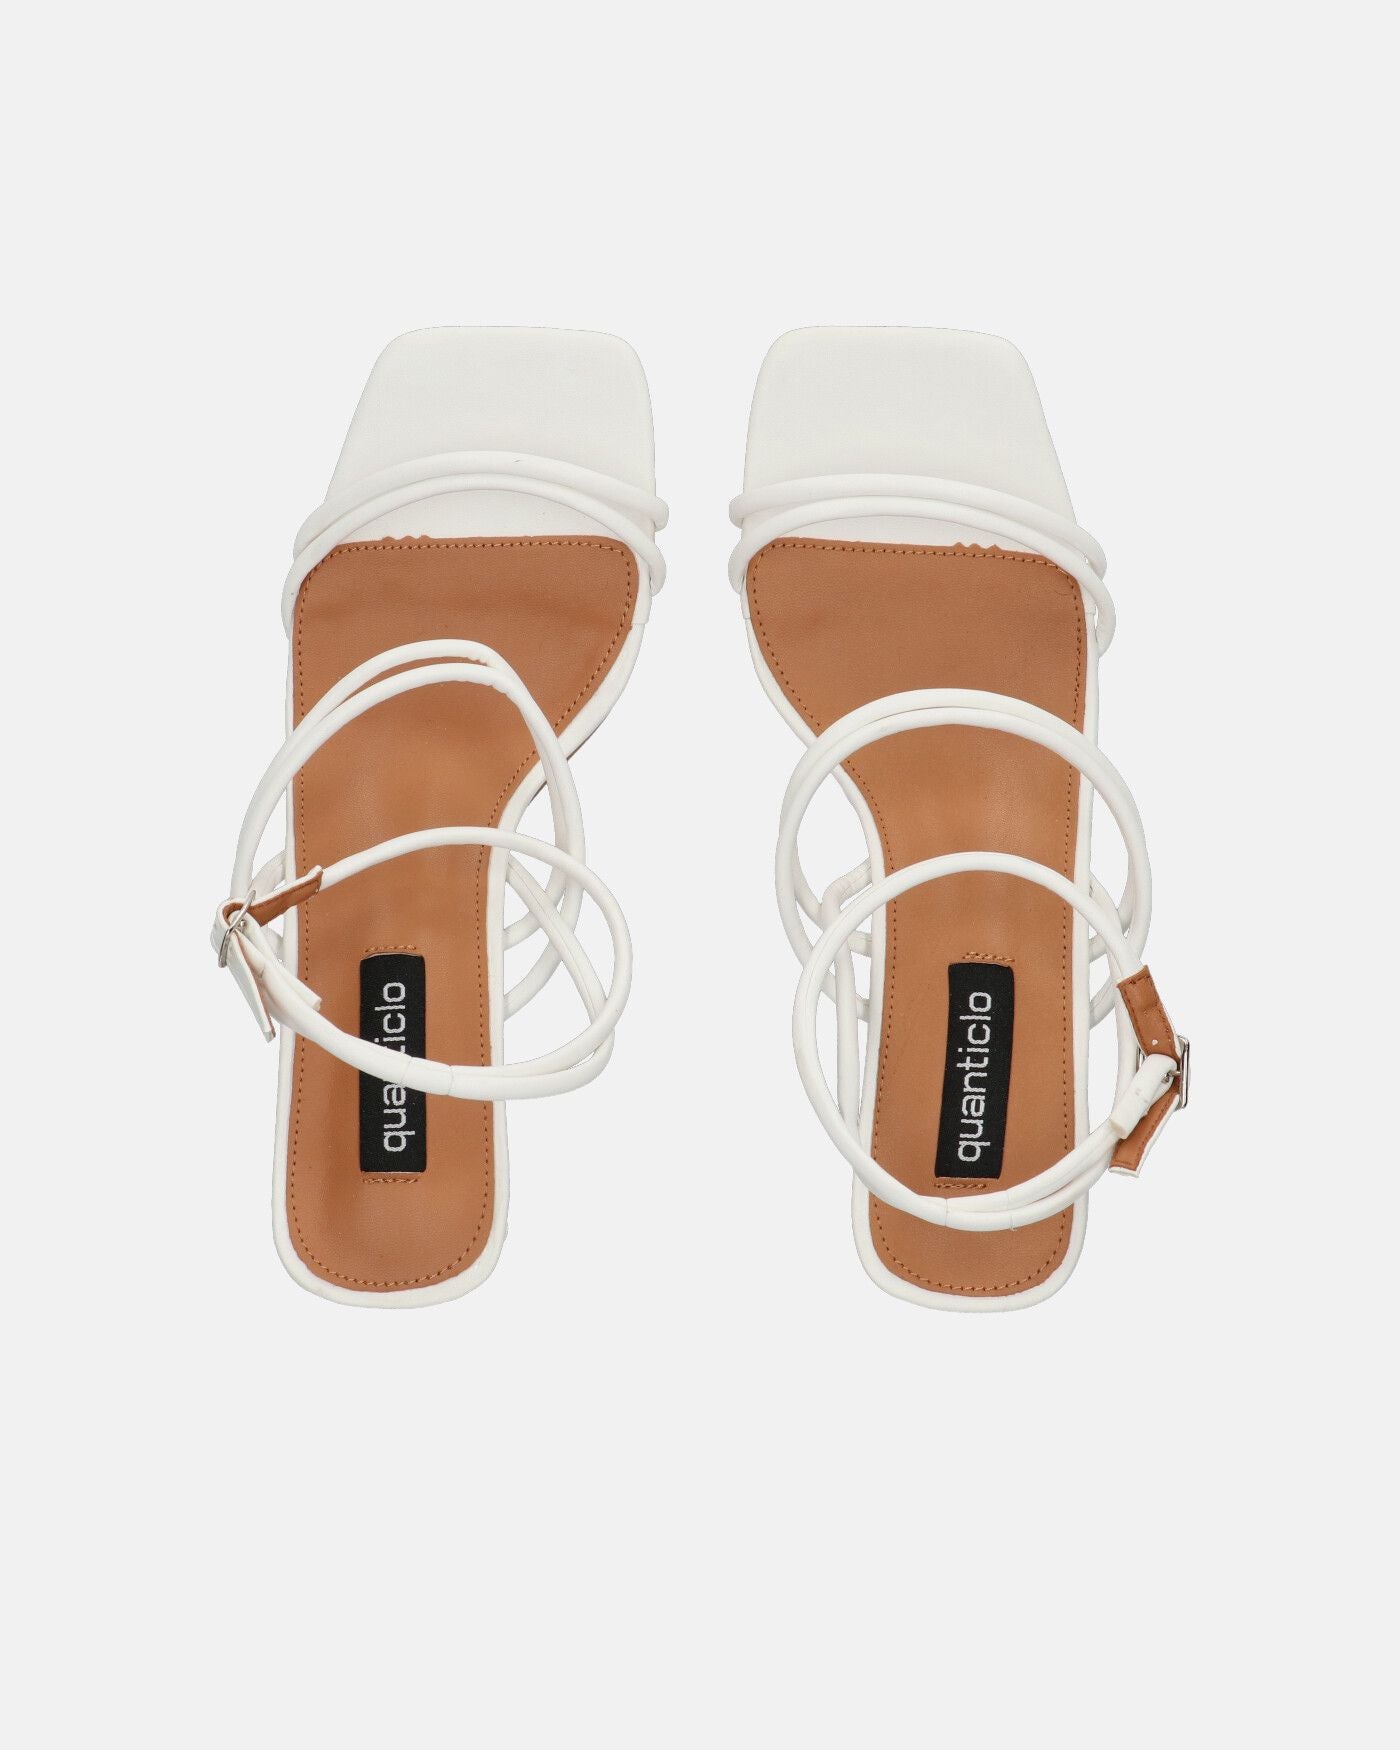 TIARA - white eco-leather sandals with laces